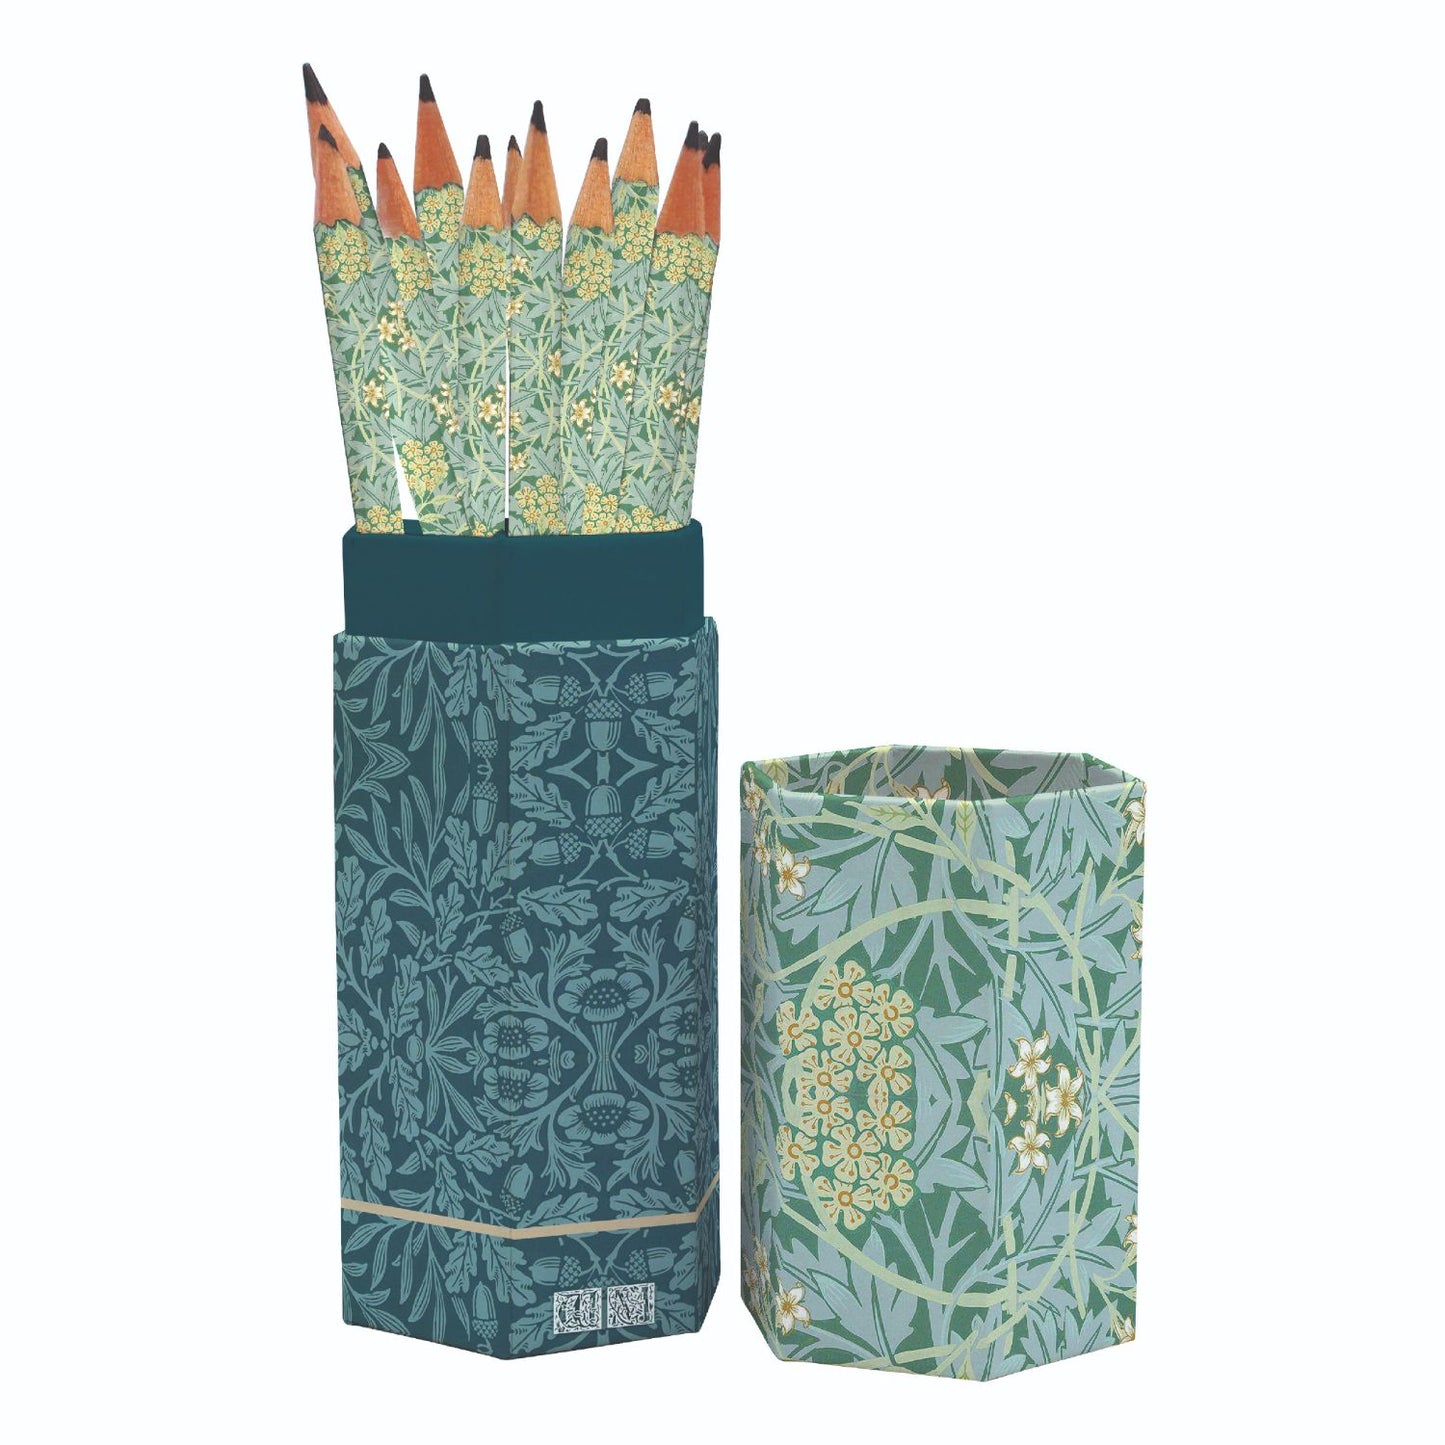 Gifted Stationery William Morris Pencil Set In Case